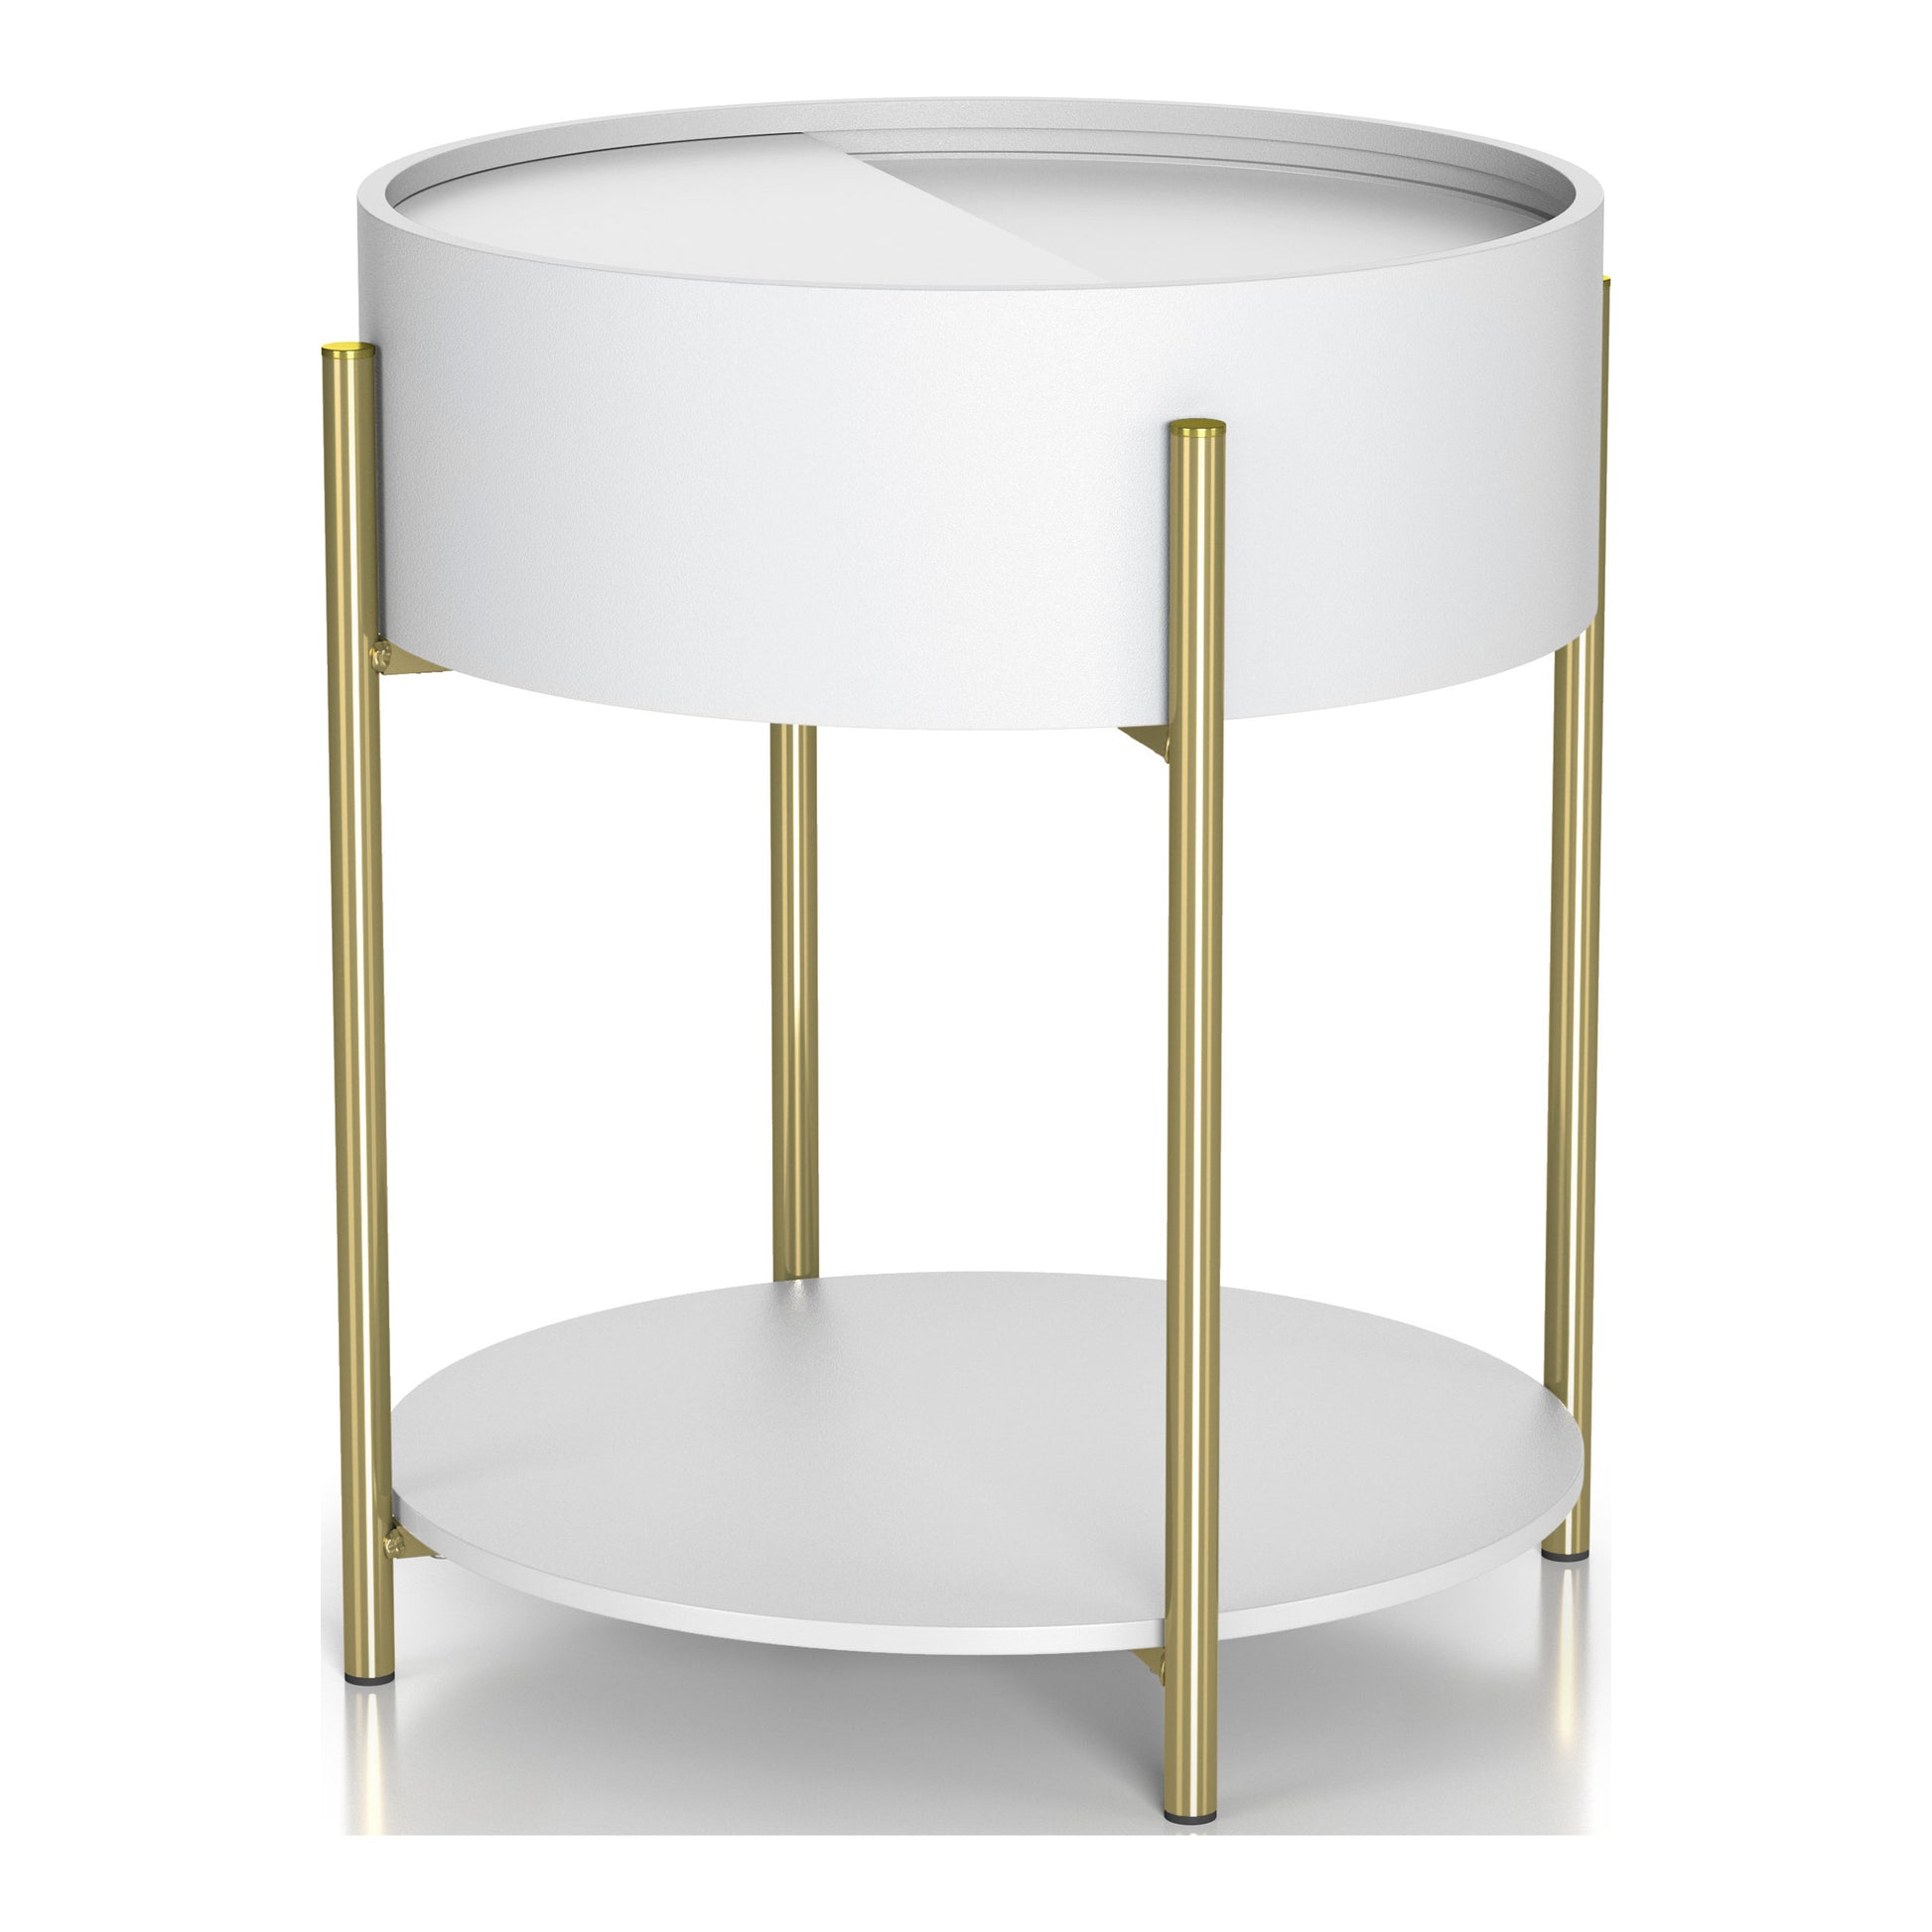 Angled modern white and gold round storage end table on a white background